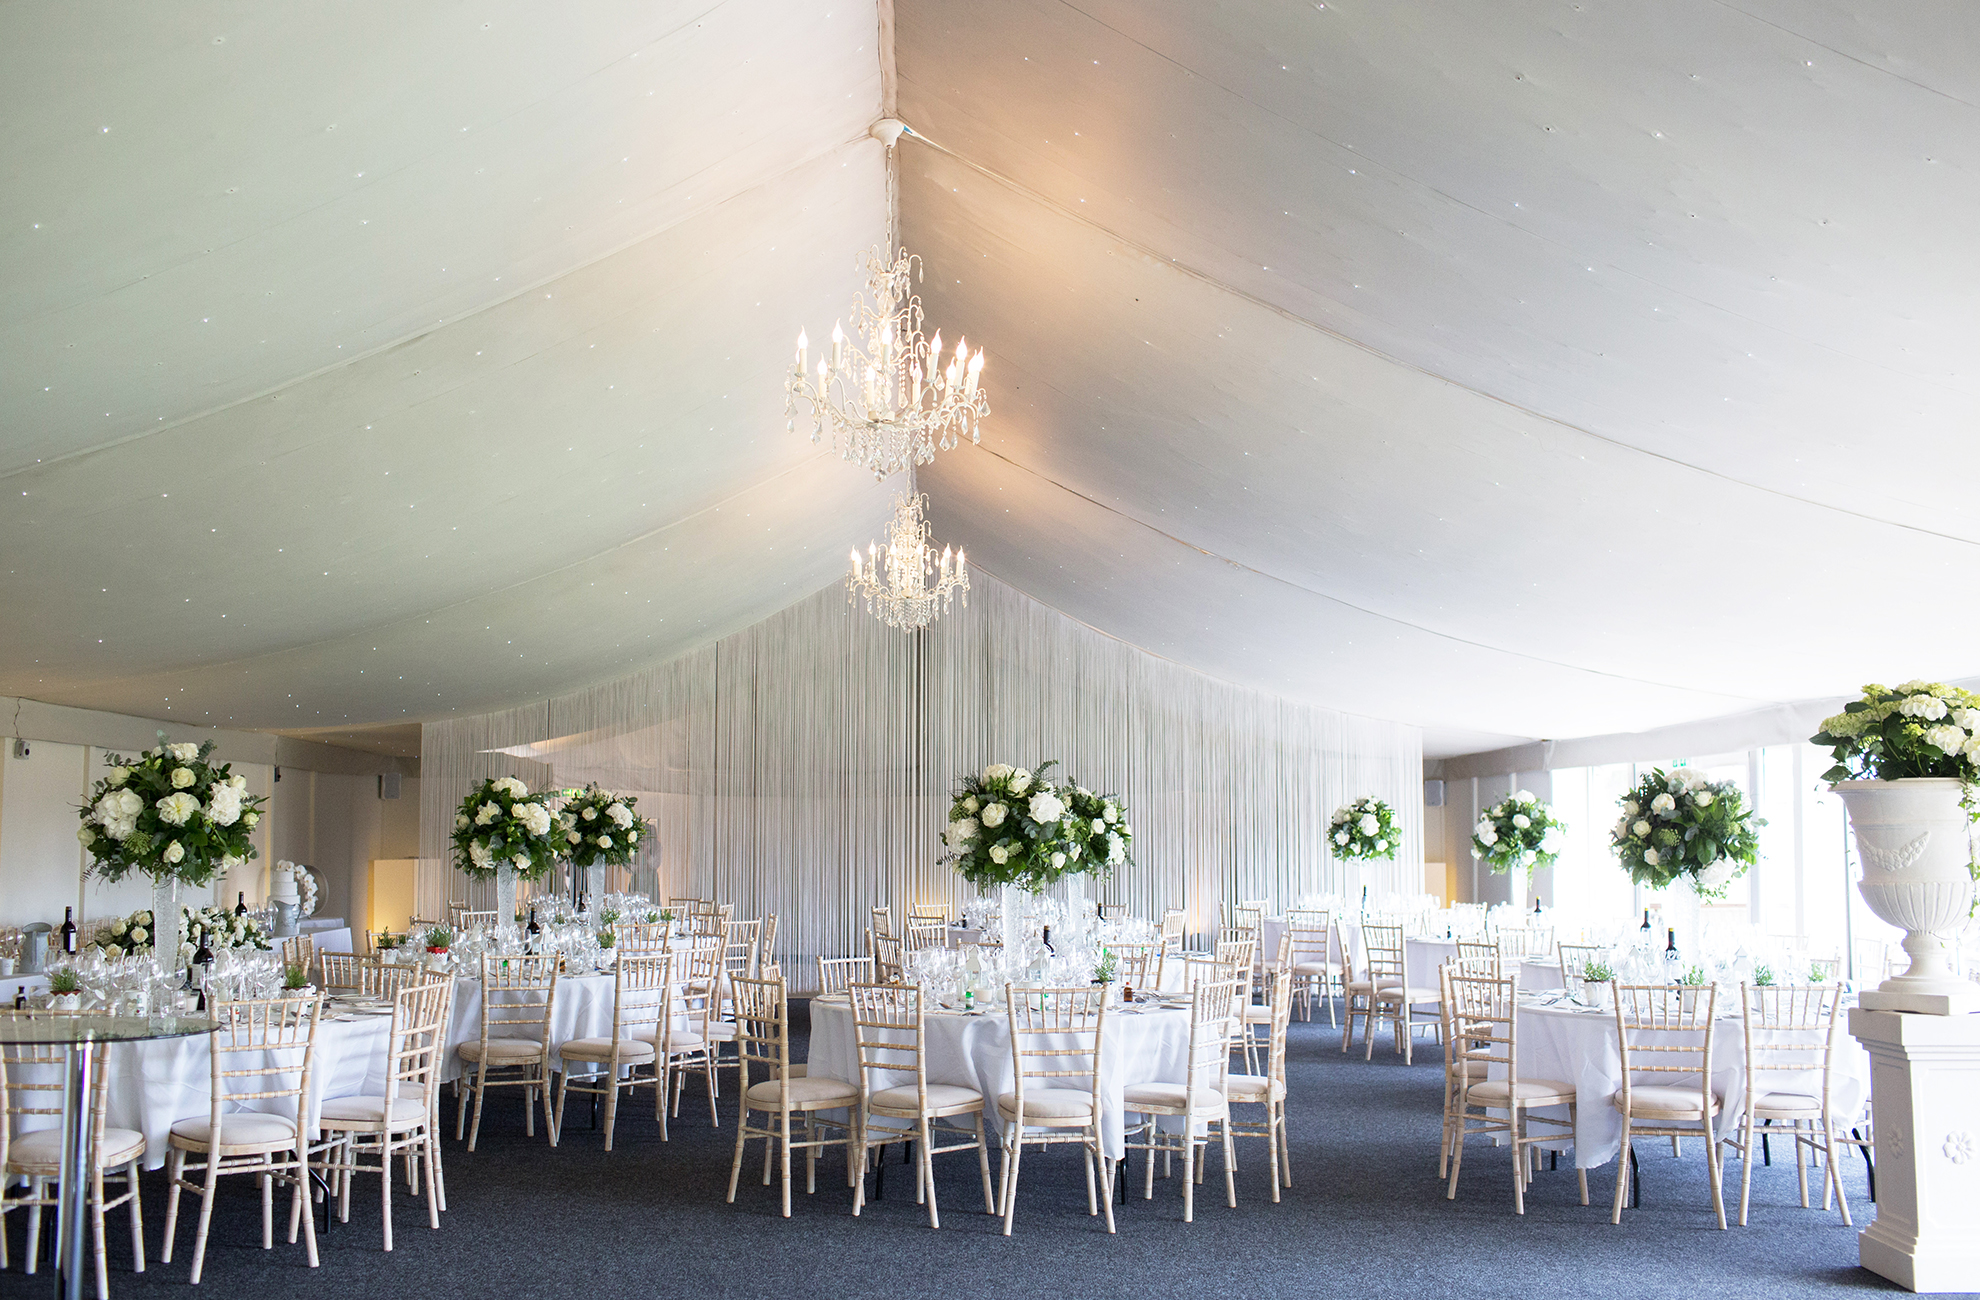 The Garden Pavillion at Combermere Abbey wedding venue in Cheshire is set up for an elegant wedding reception